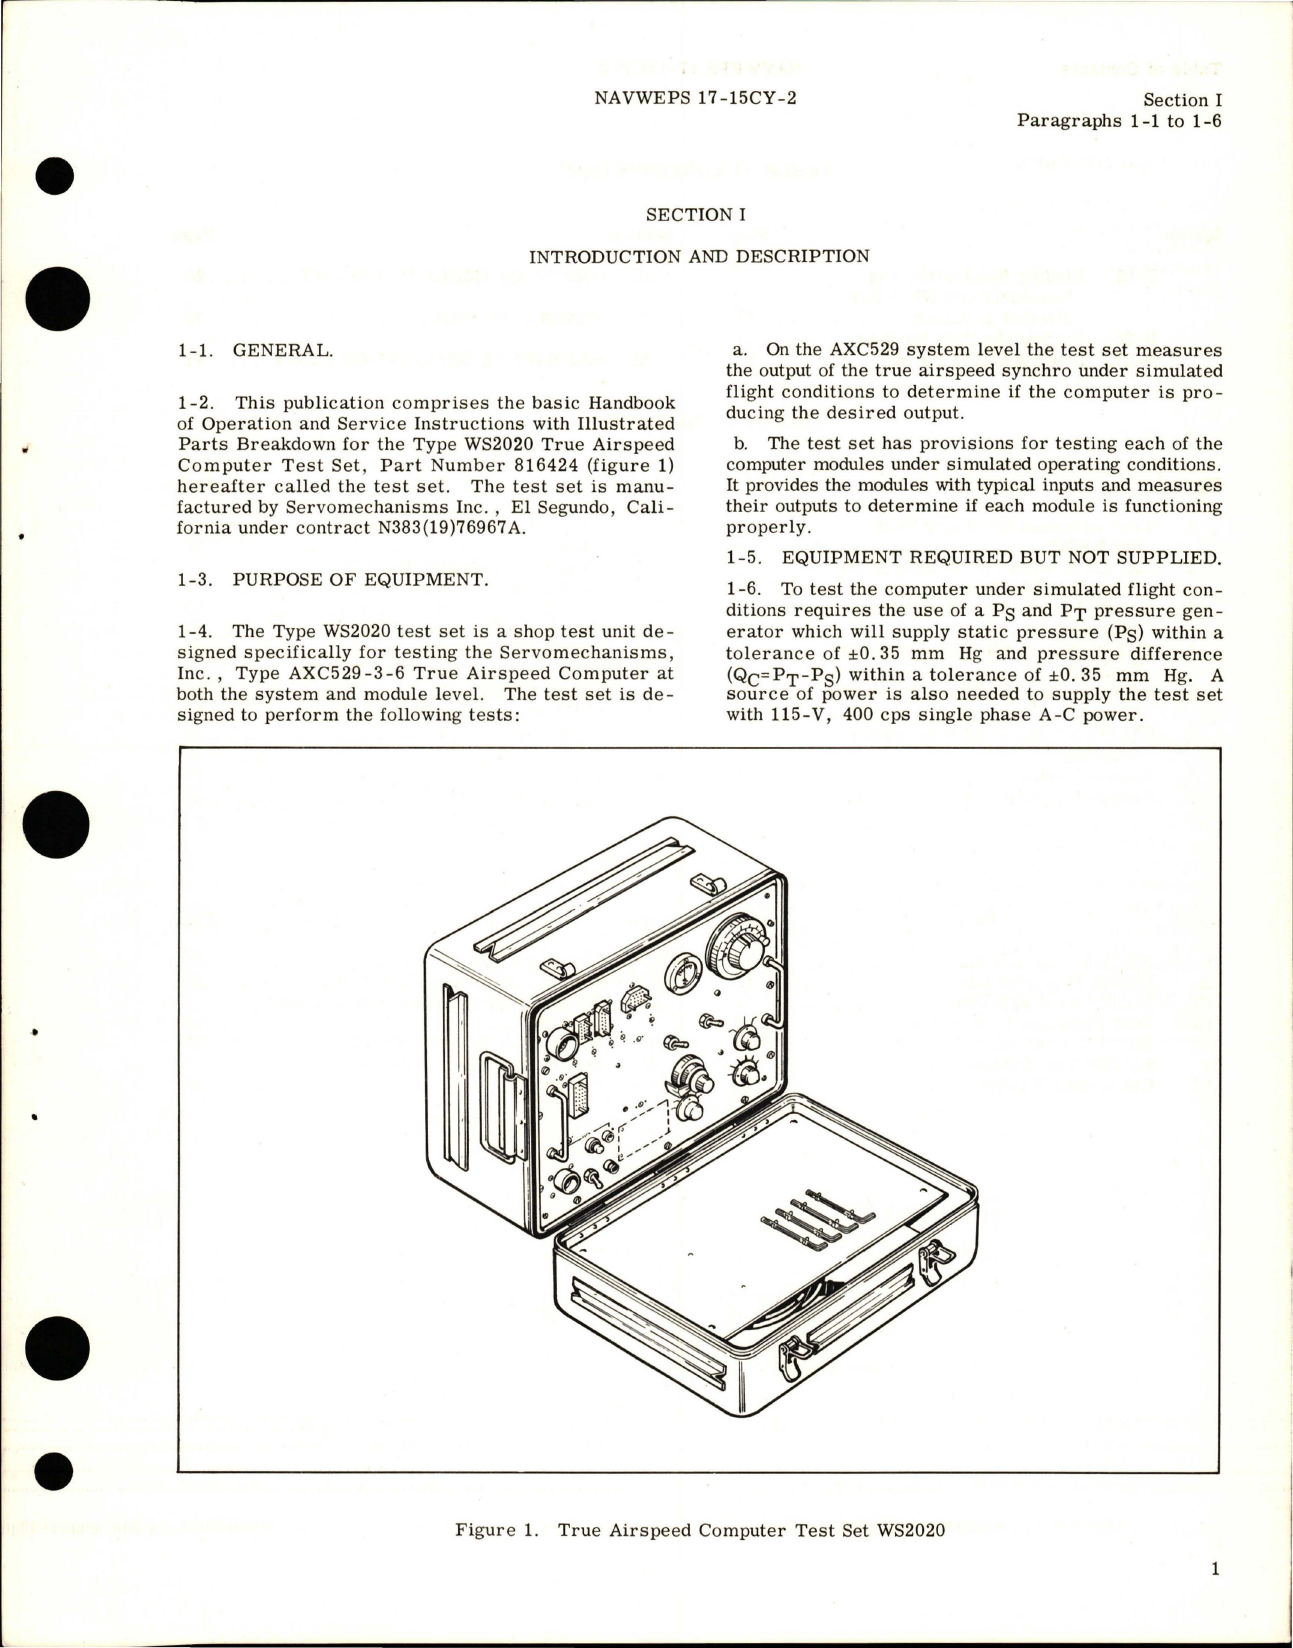 Sample page 5 from AirCorps Library document: Operation, Service Instructions with Illustrated Parts Breakdown for True Airspeed Computer Test Set - Type WS2020, Part 816424